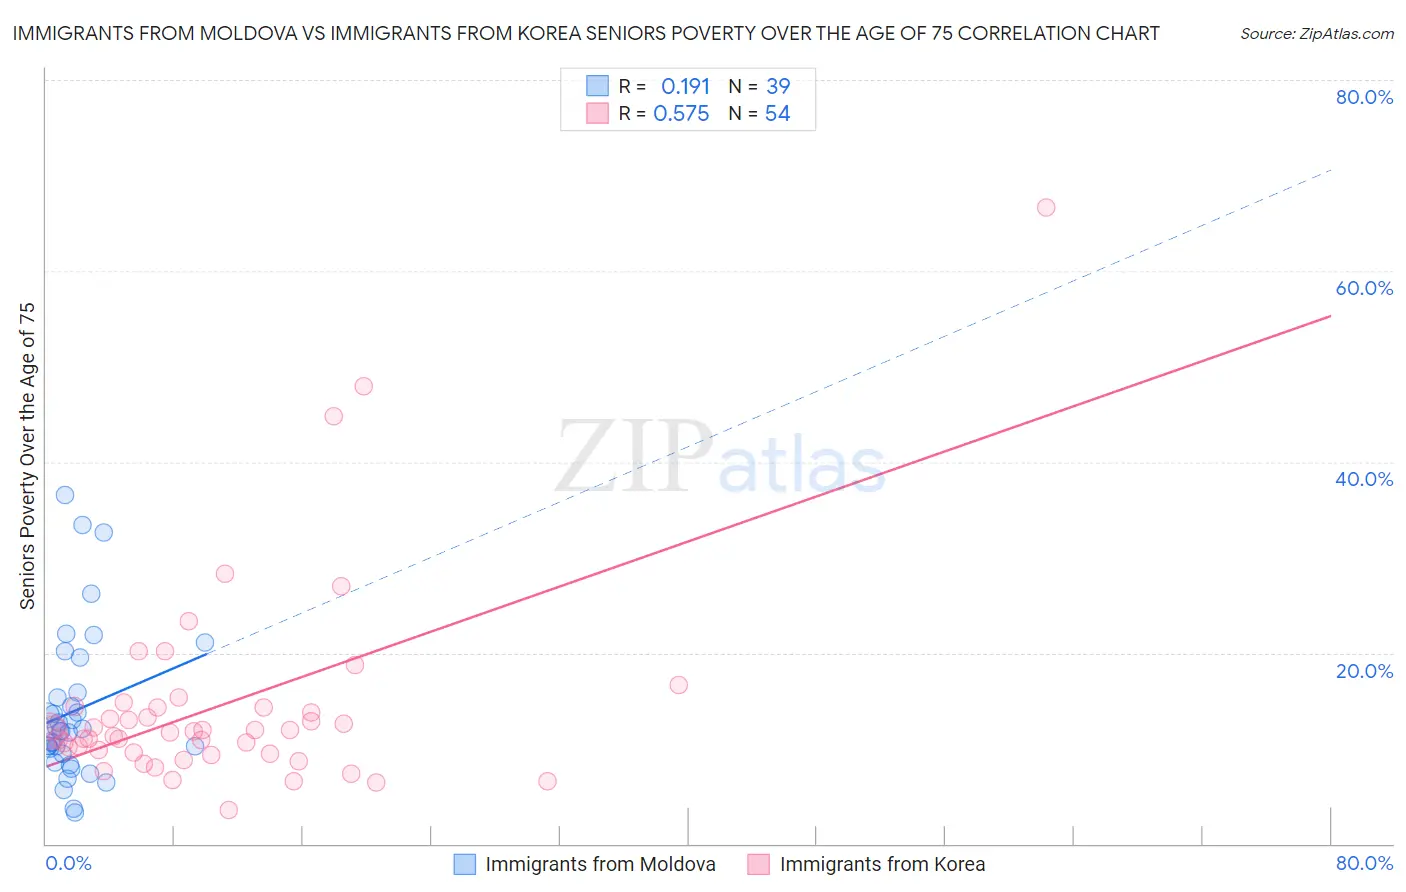 Immigrants from Moldova vs Immigrants from Korea Seniors Poverty Over the Age of 75